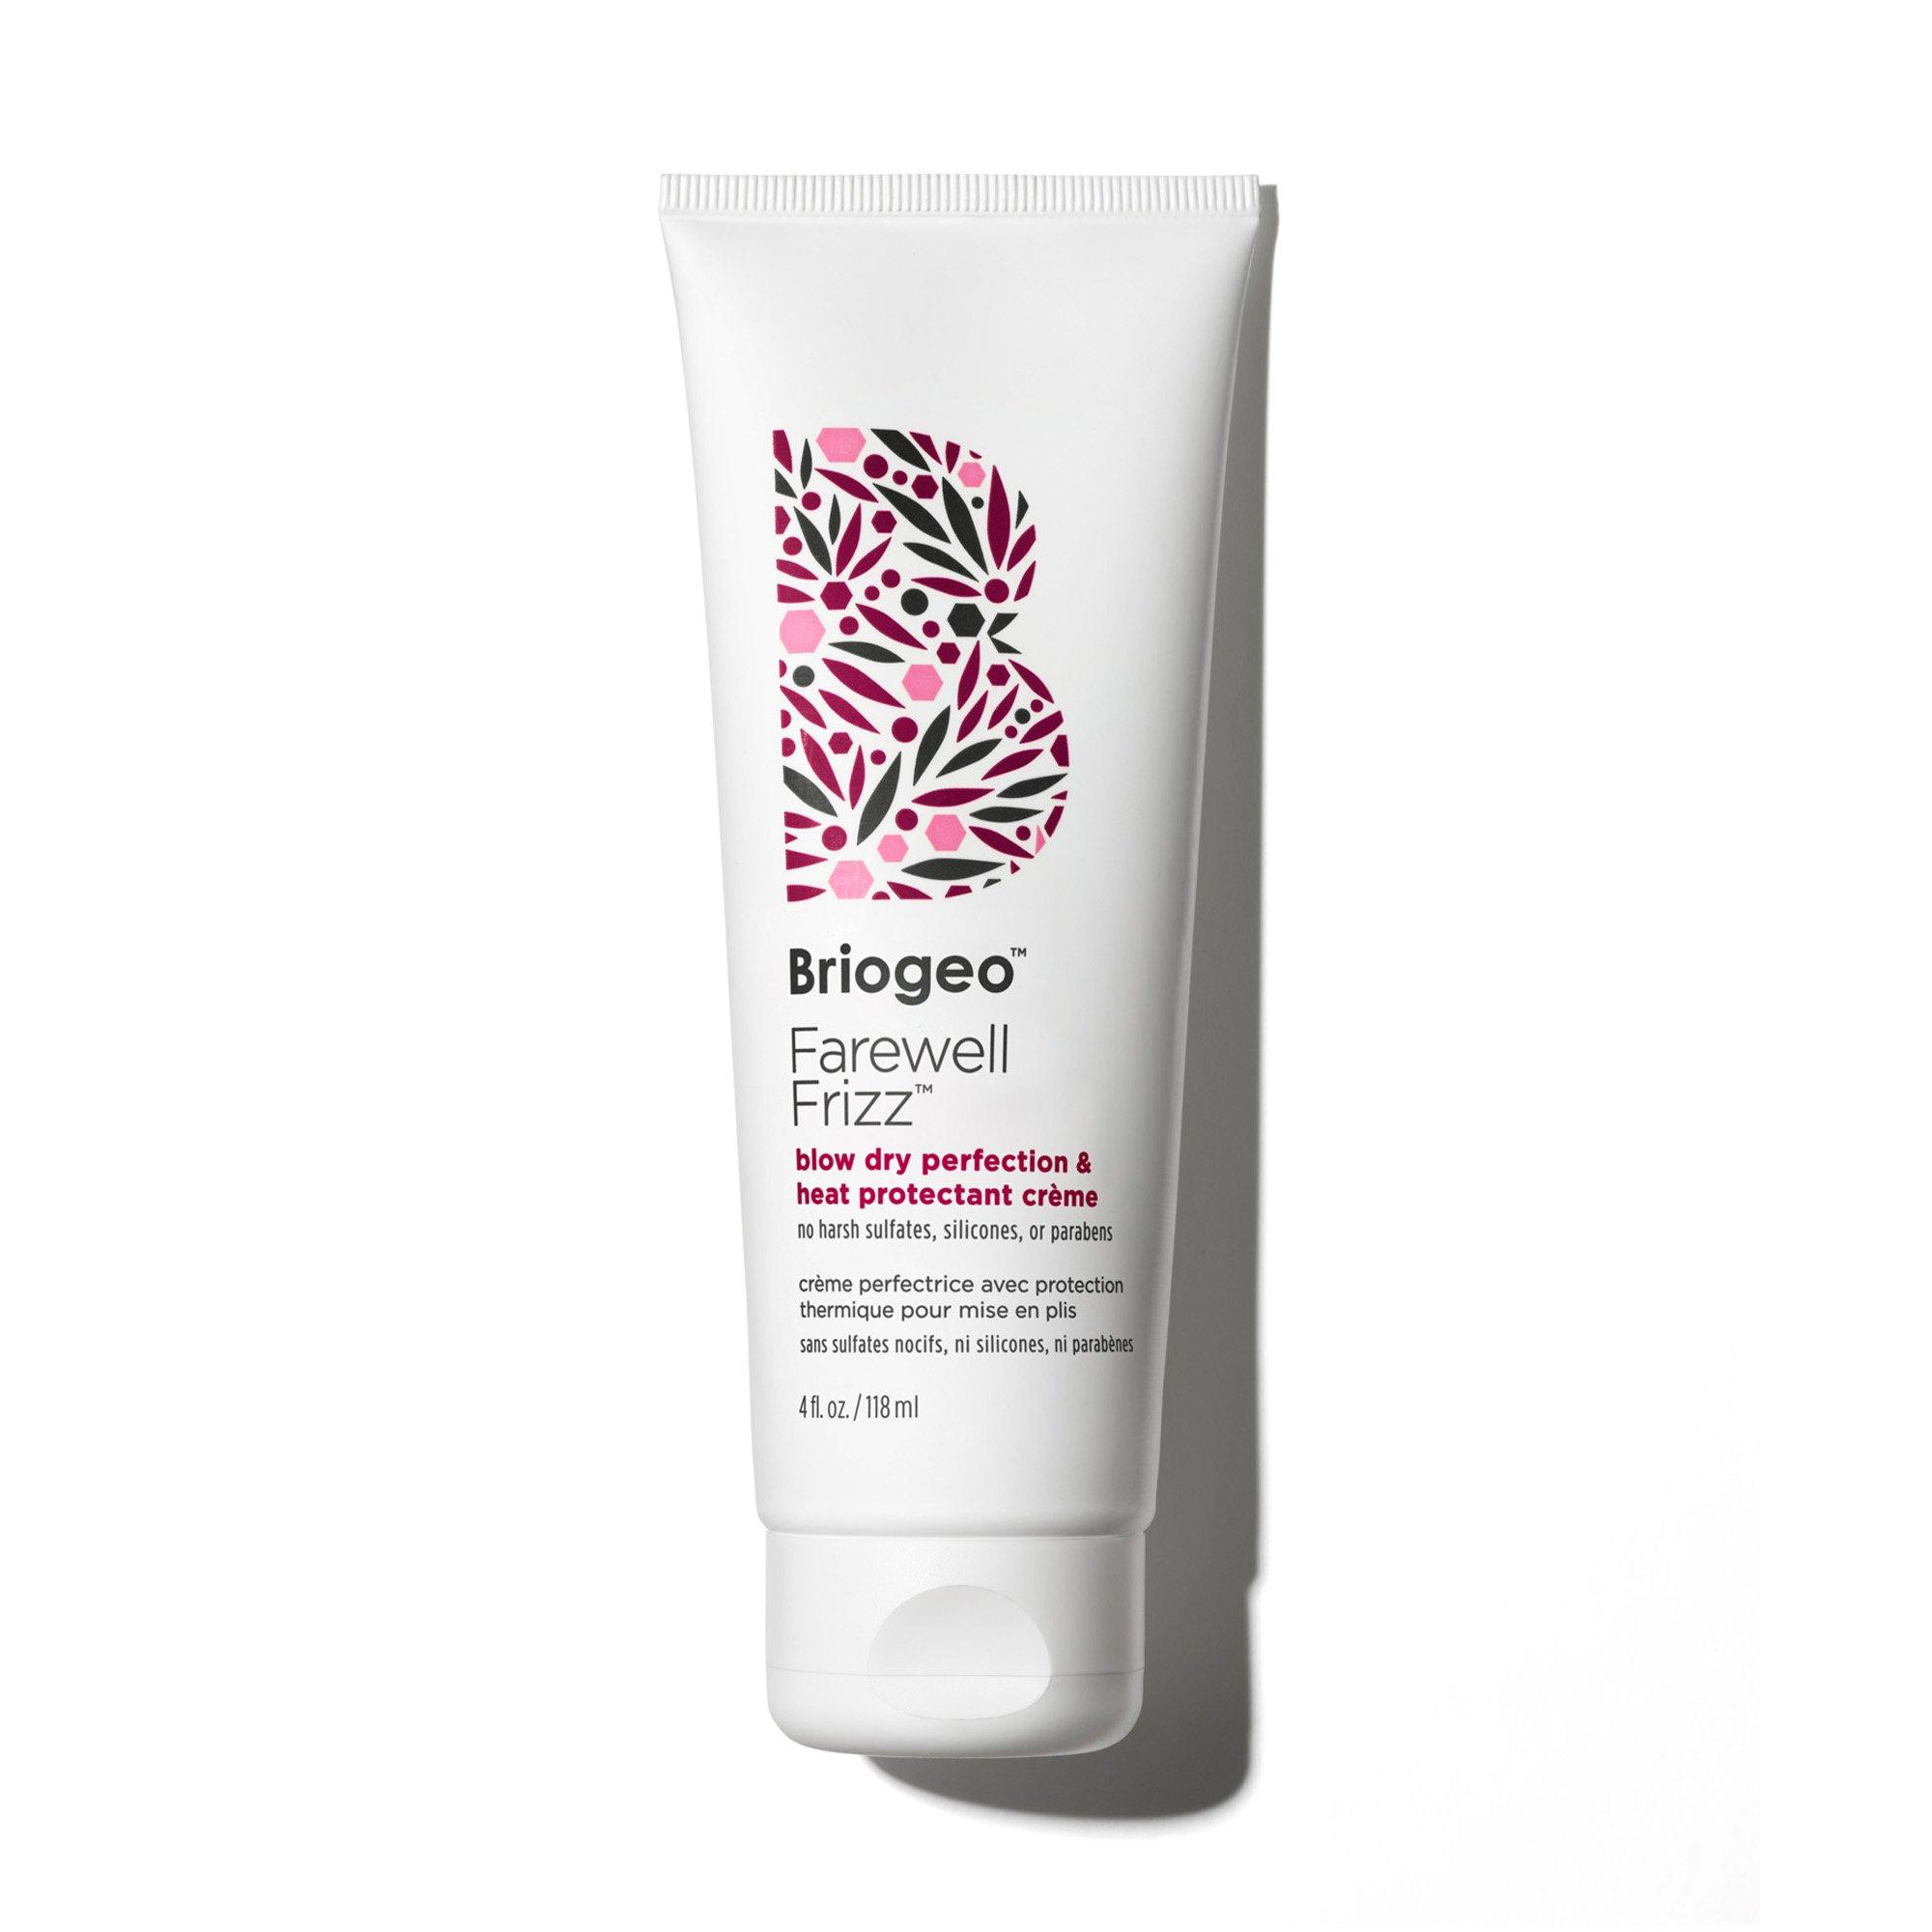 Image of Briogeo Farewell Frizz - Blow Dry Perfection & Heat Protectant Crème